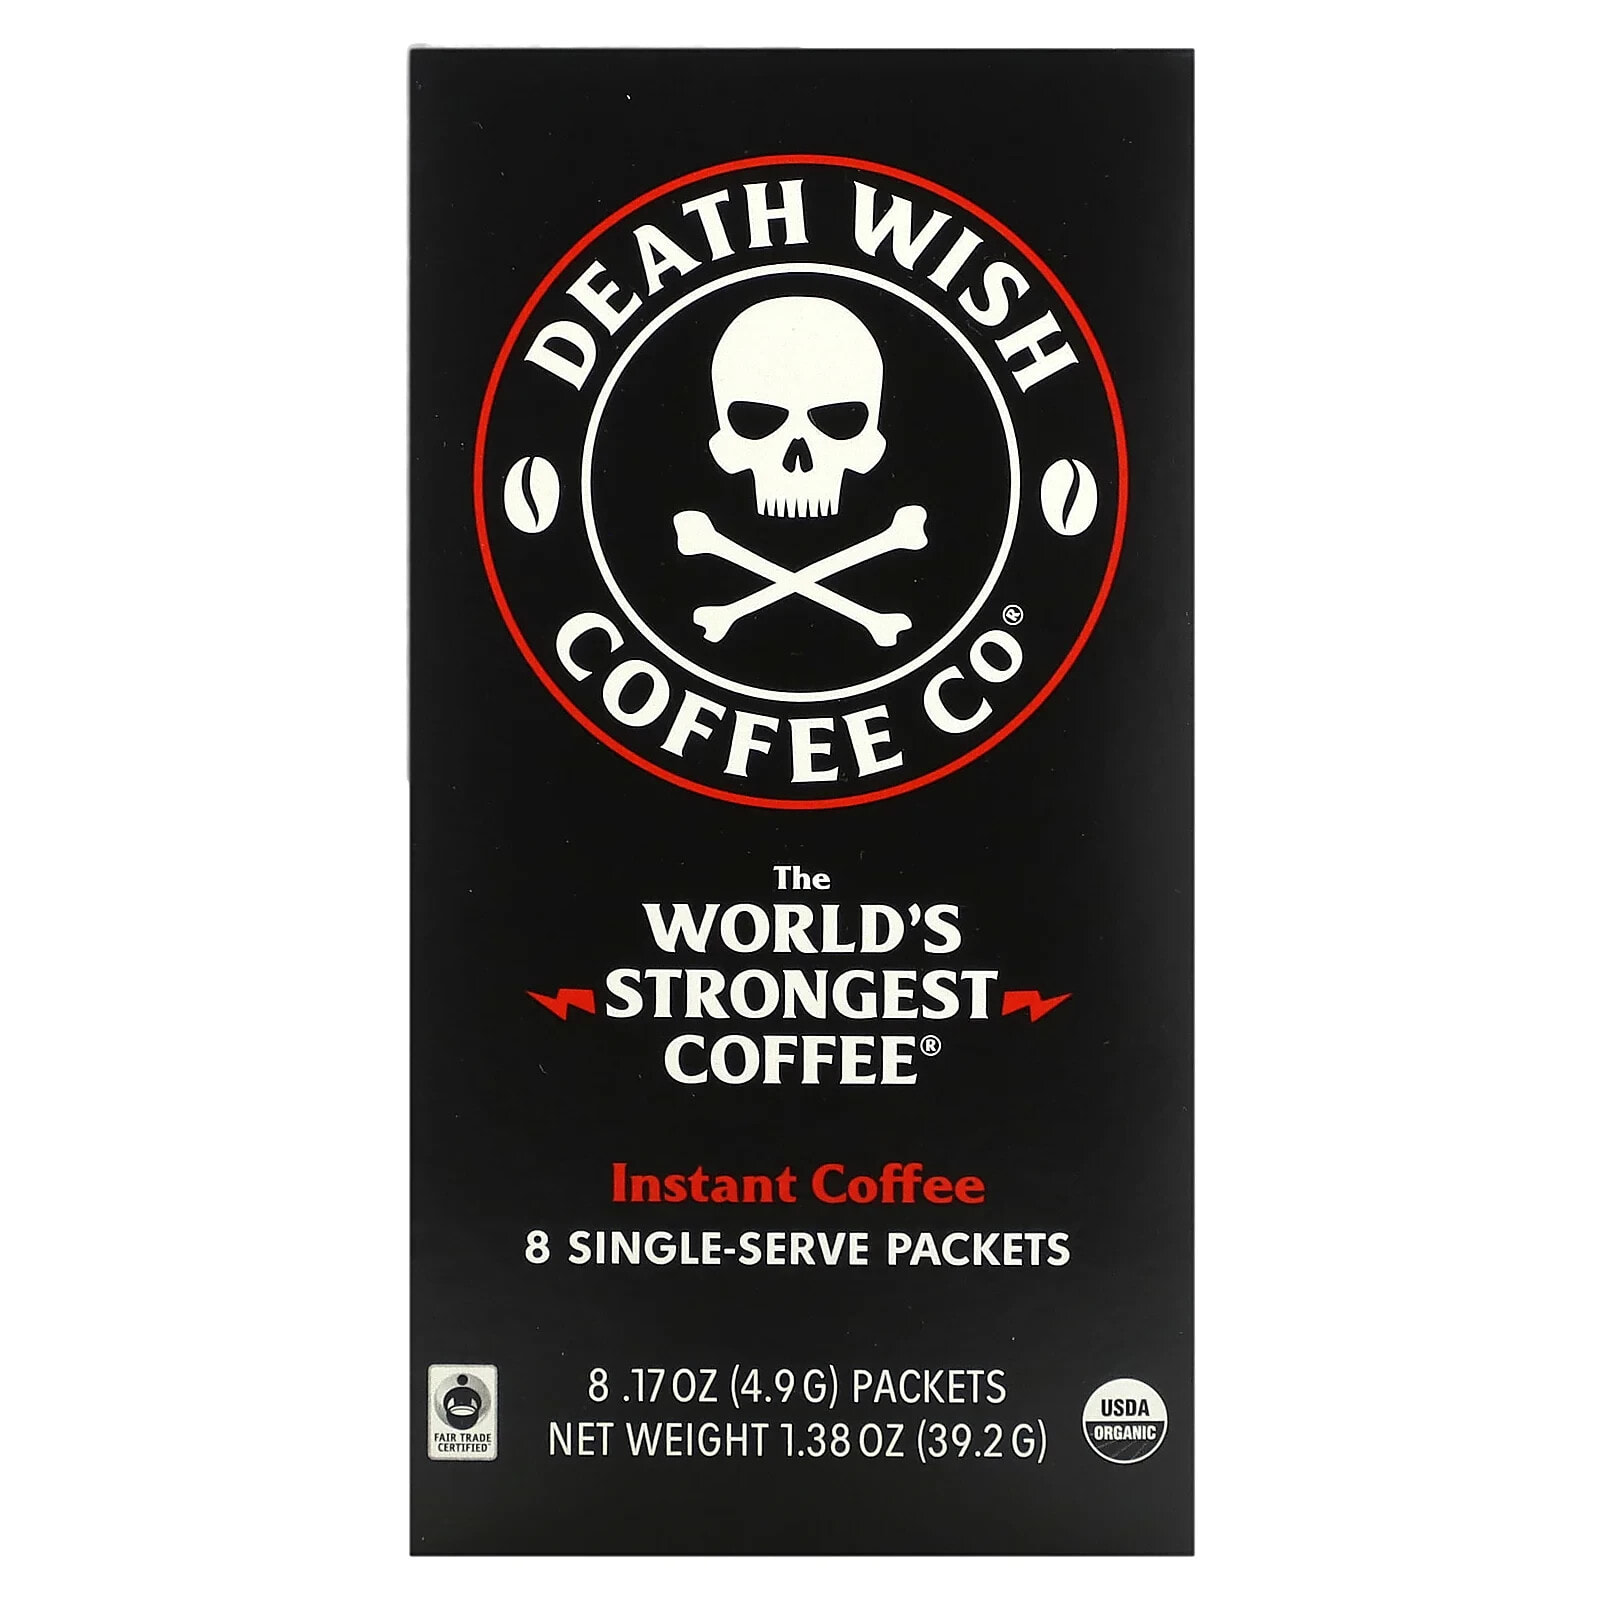 Death Wish Coffee, The World's Strongest Coffee, Instant Coffee, 8 Single-Serve Packets, 0.17 oz (4.9 g) Each